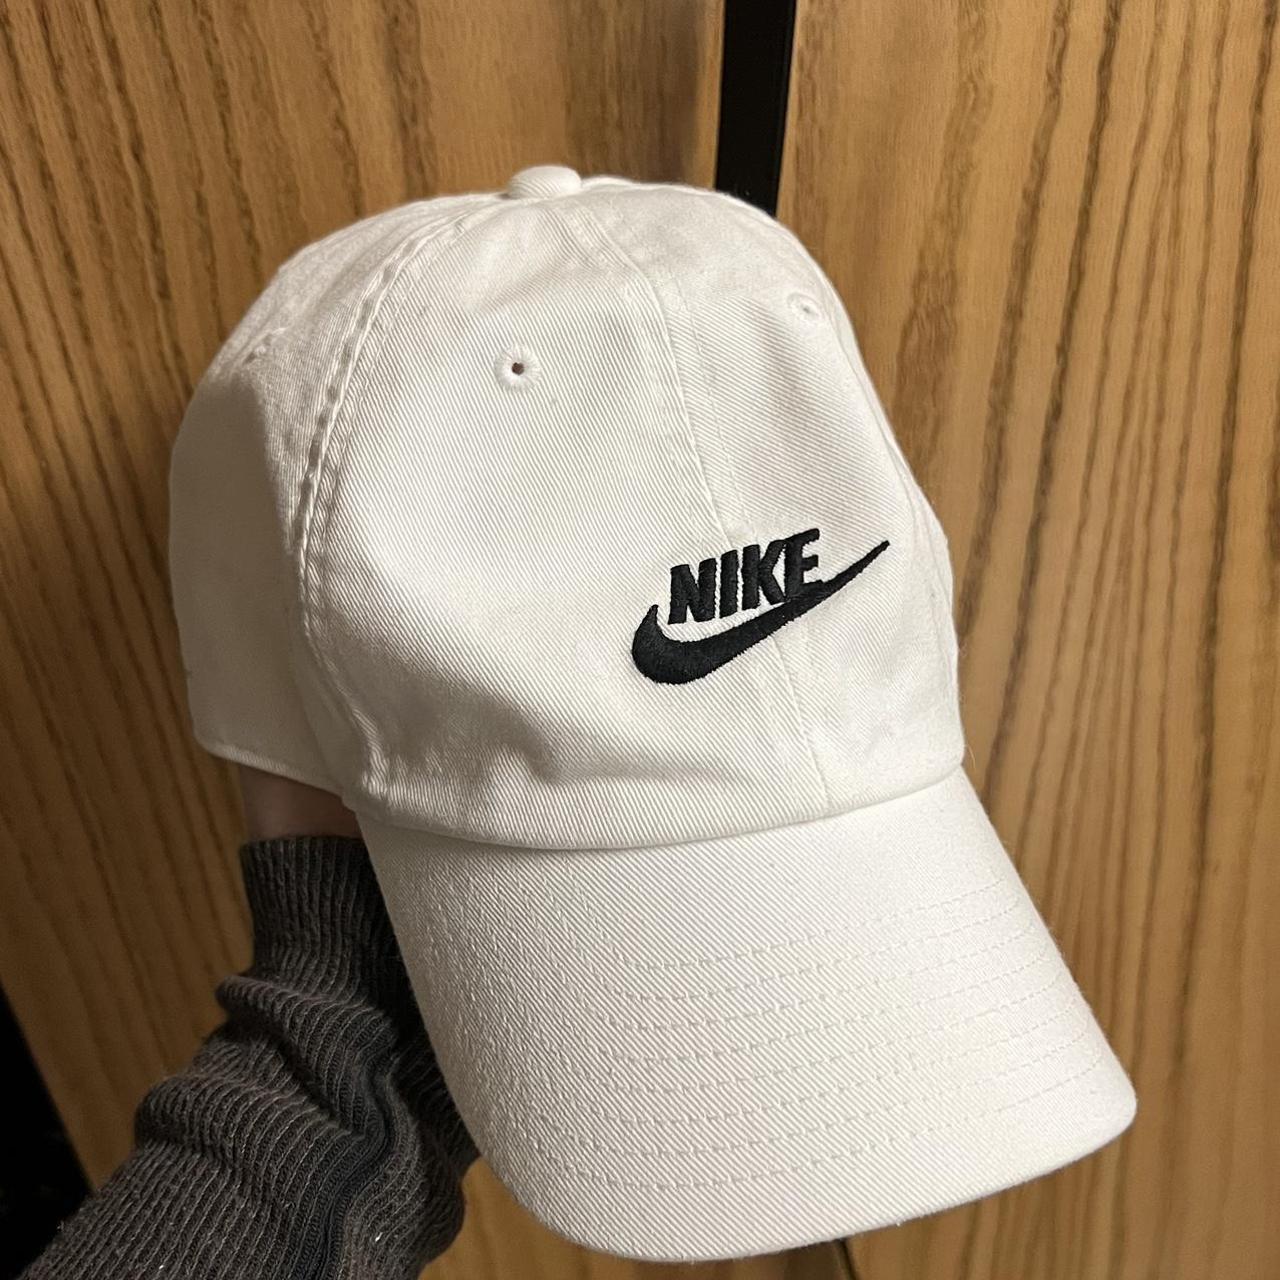 unisex white nike hat available for next day ship - Depop